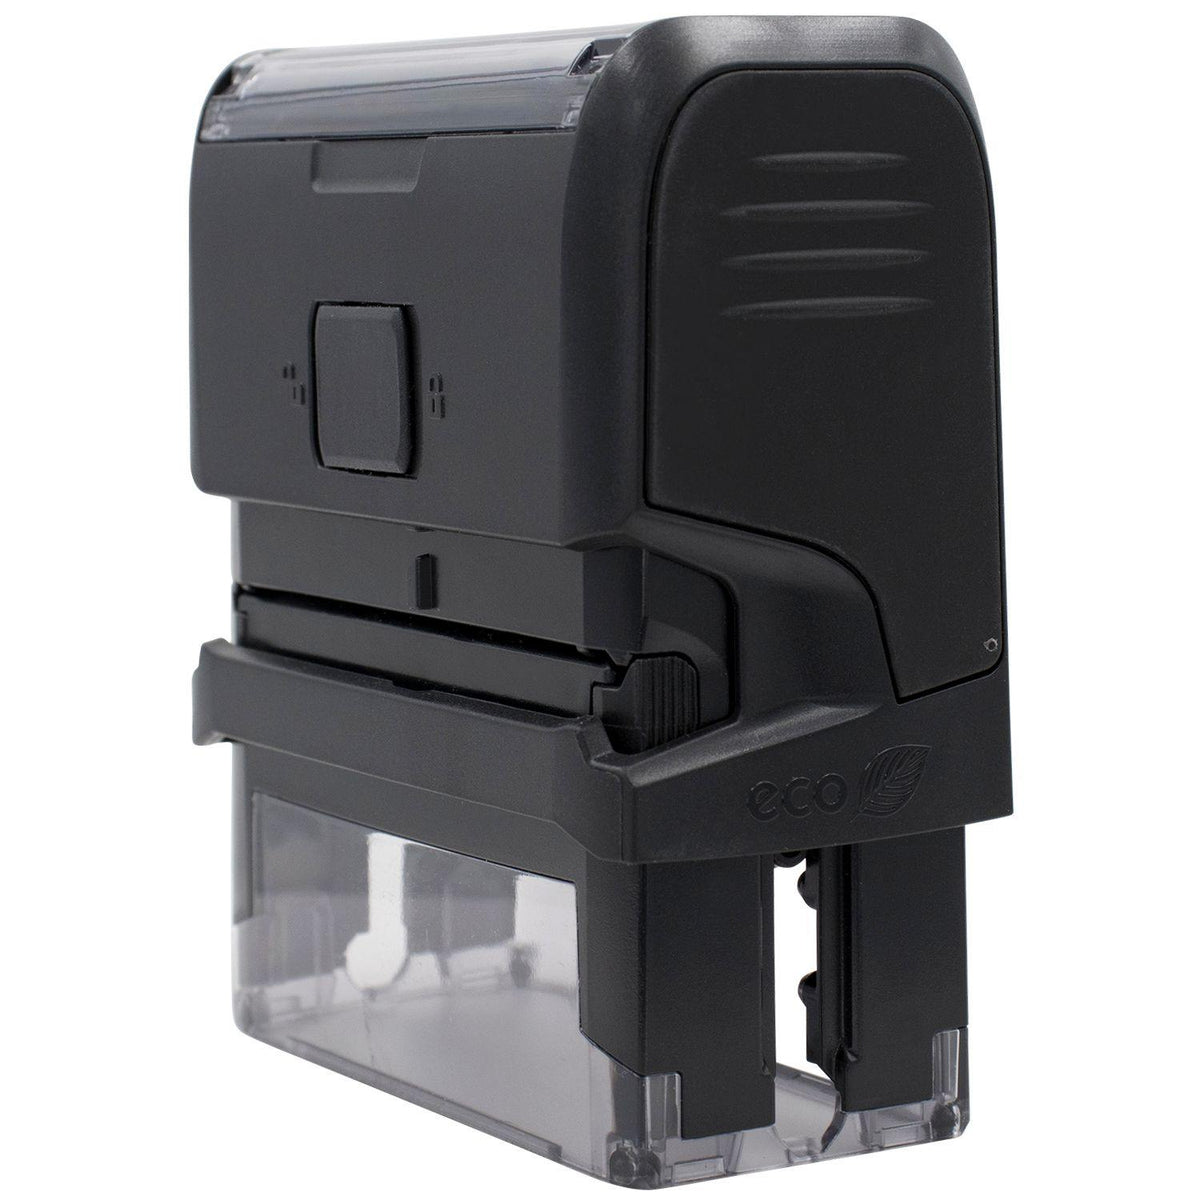 Large Self-Inking Printed Matter Stamp - Engineer Seal Stamps - Brand_Trodat, Impression Size_Large, Stamp Type_Self-Inking Stamp, Type of Use_General, Type of Use_Office